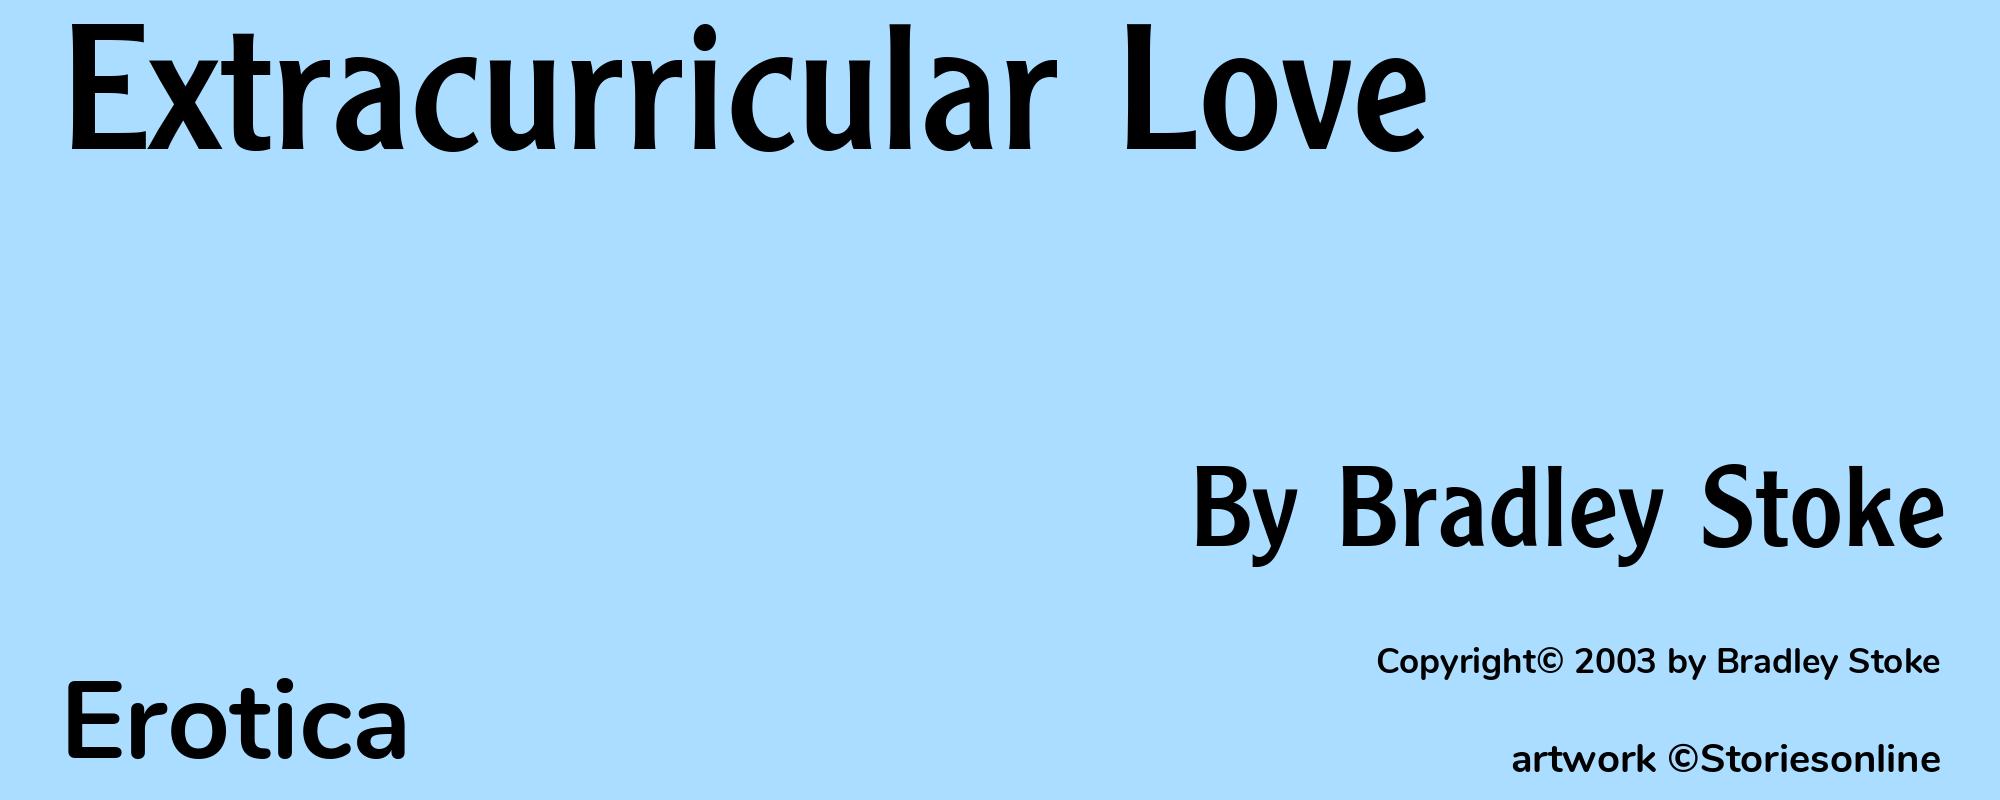 Extracurricular Love - Cover